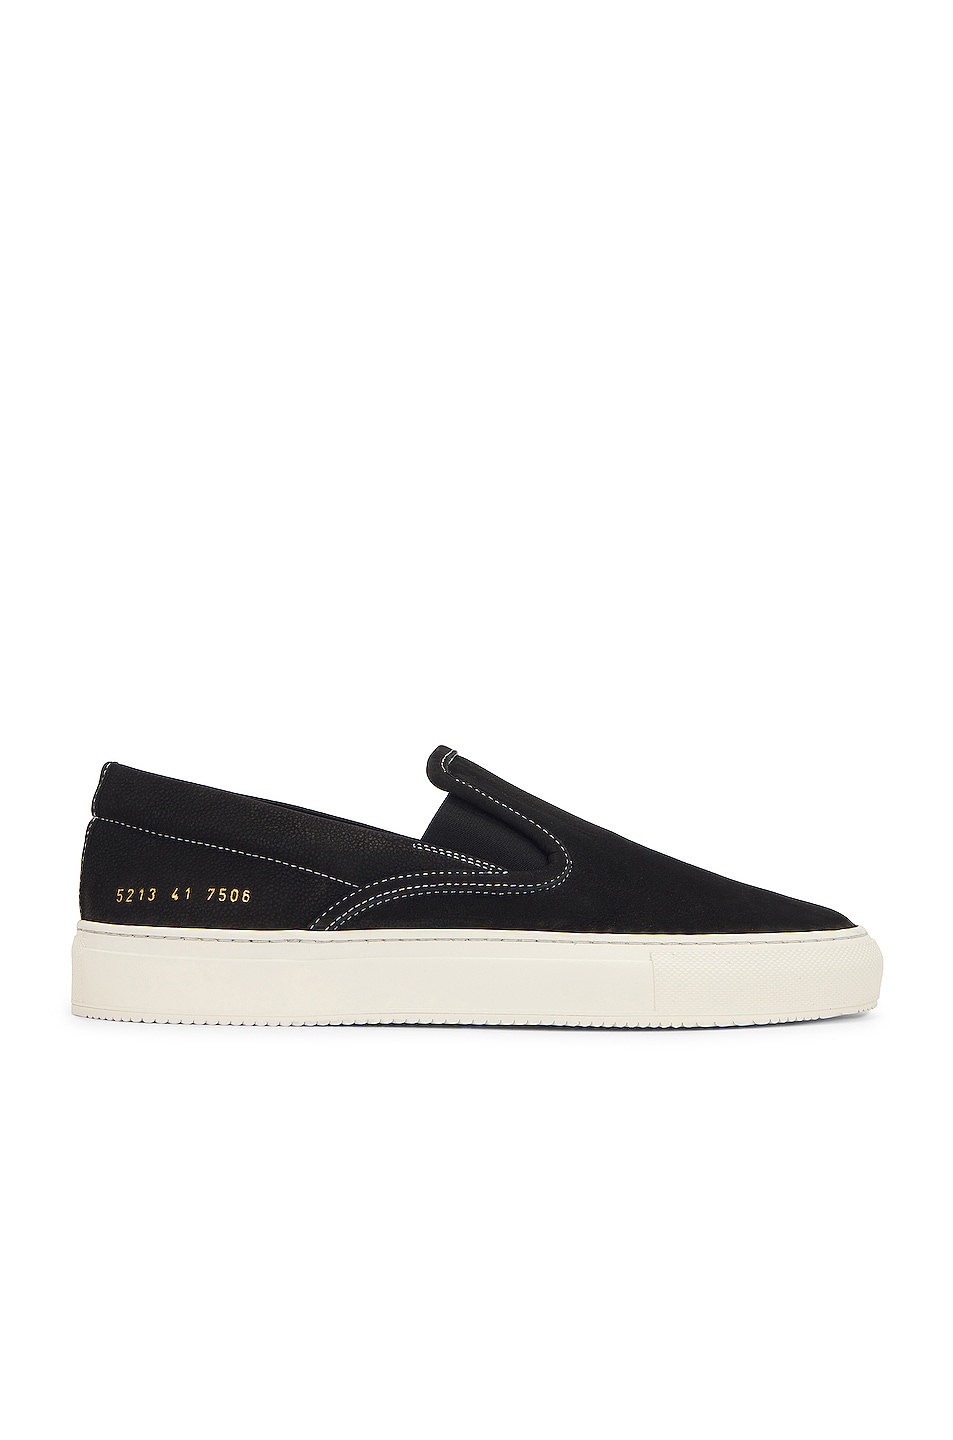 Image 1 of Common Projects Slip on Article 5213 in Black & White